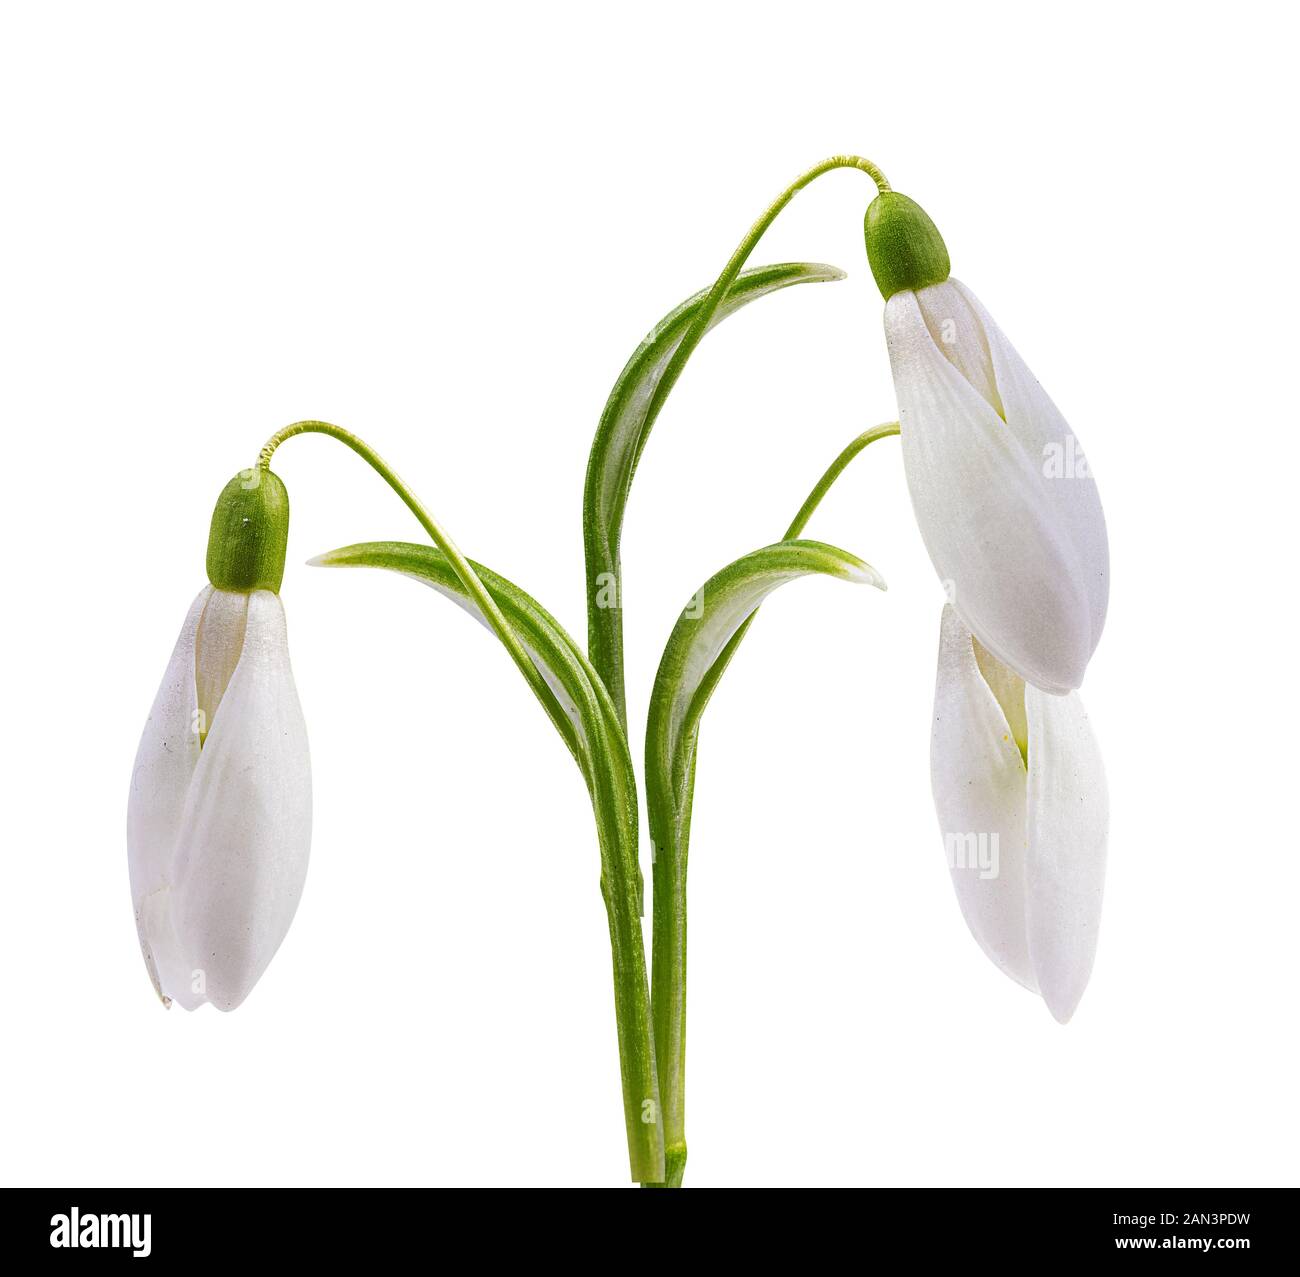 snowdrop isolated on white background Stock Photo